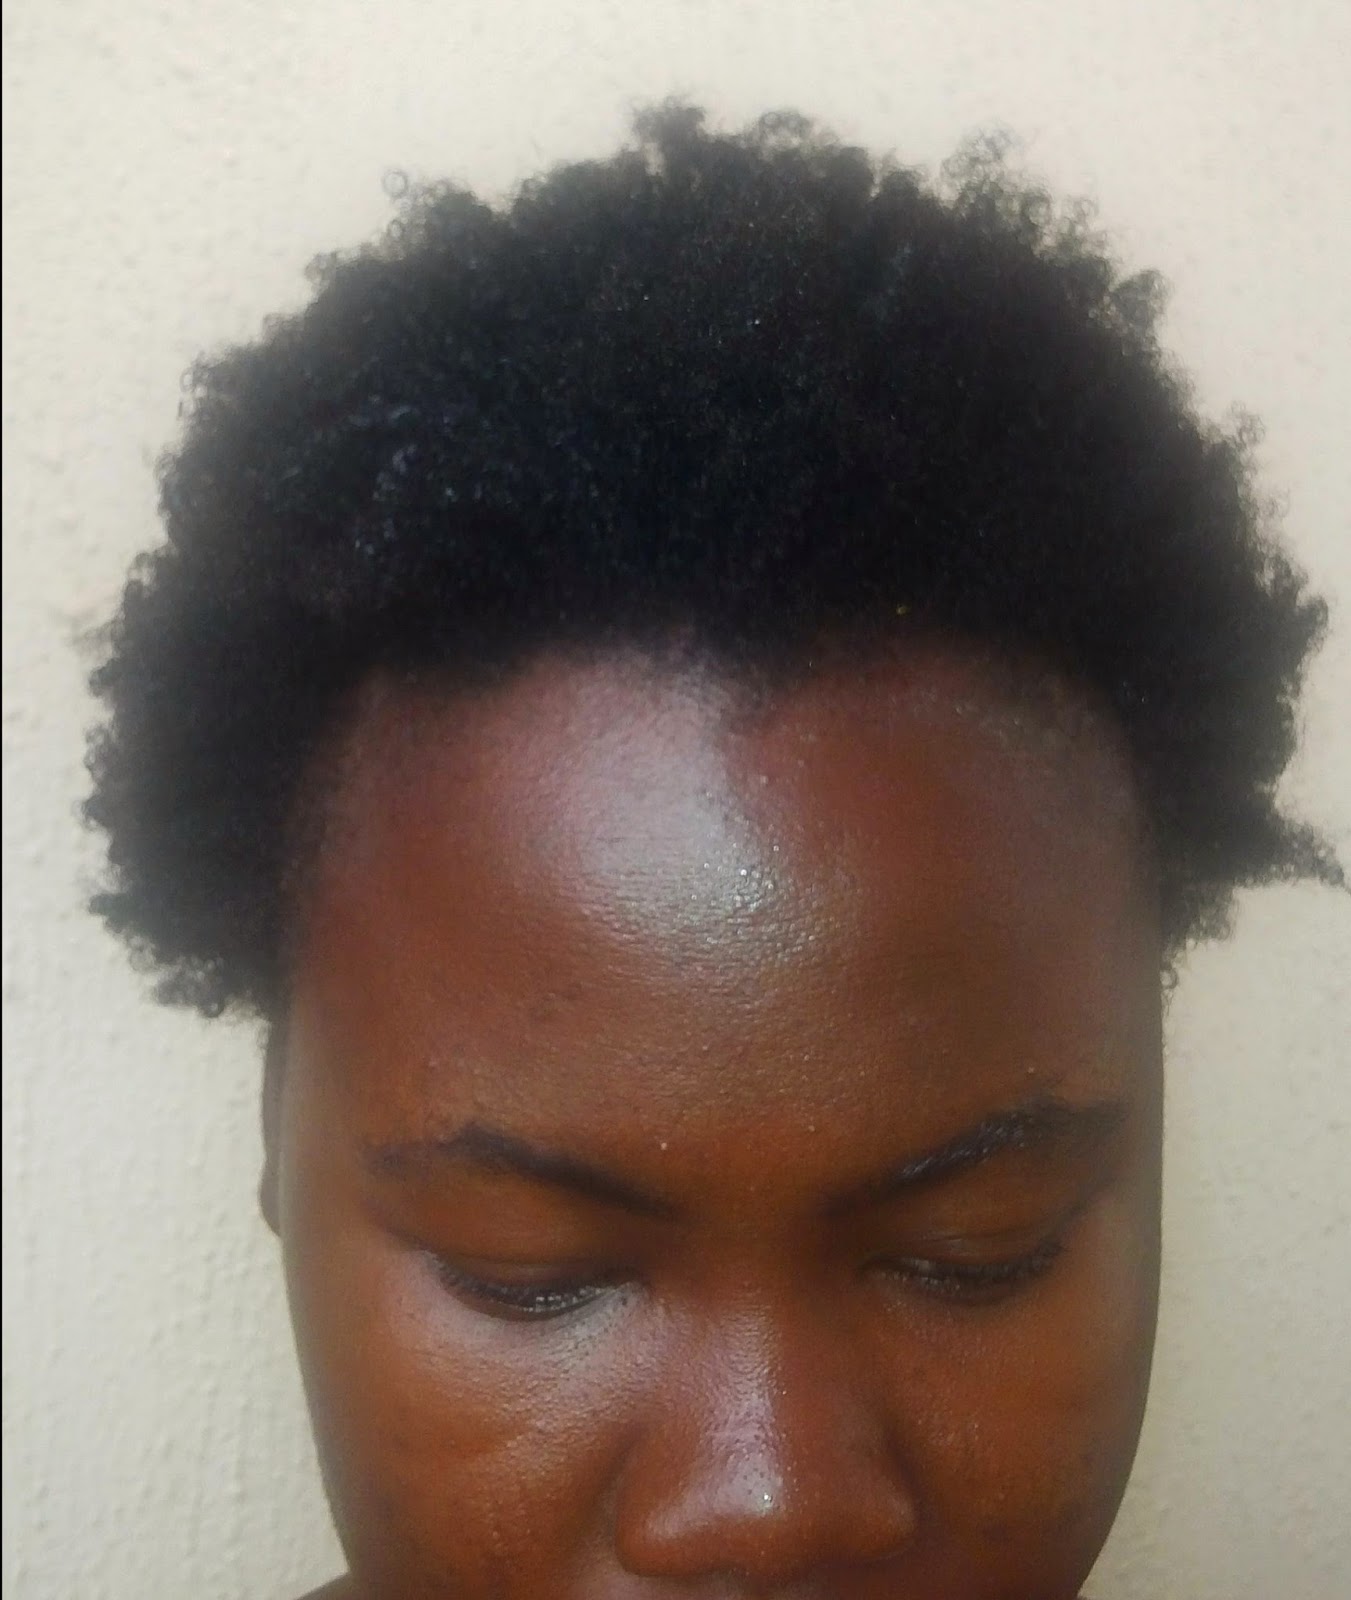 New African Rubber Hair Thread For Threading/Stretching Out Natural hair